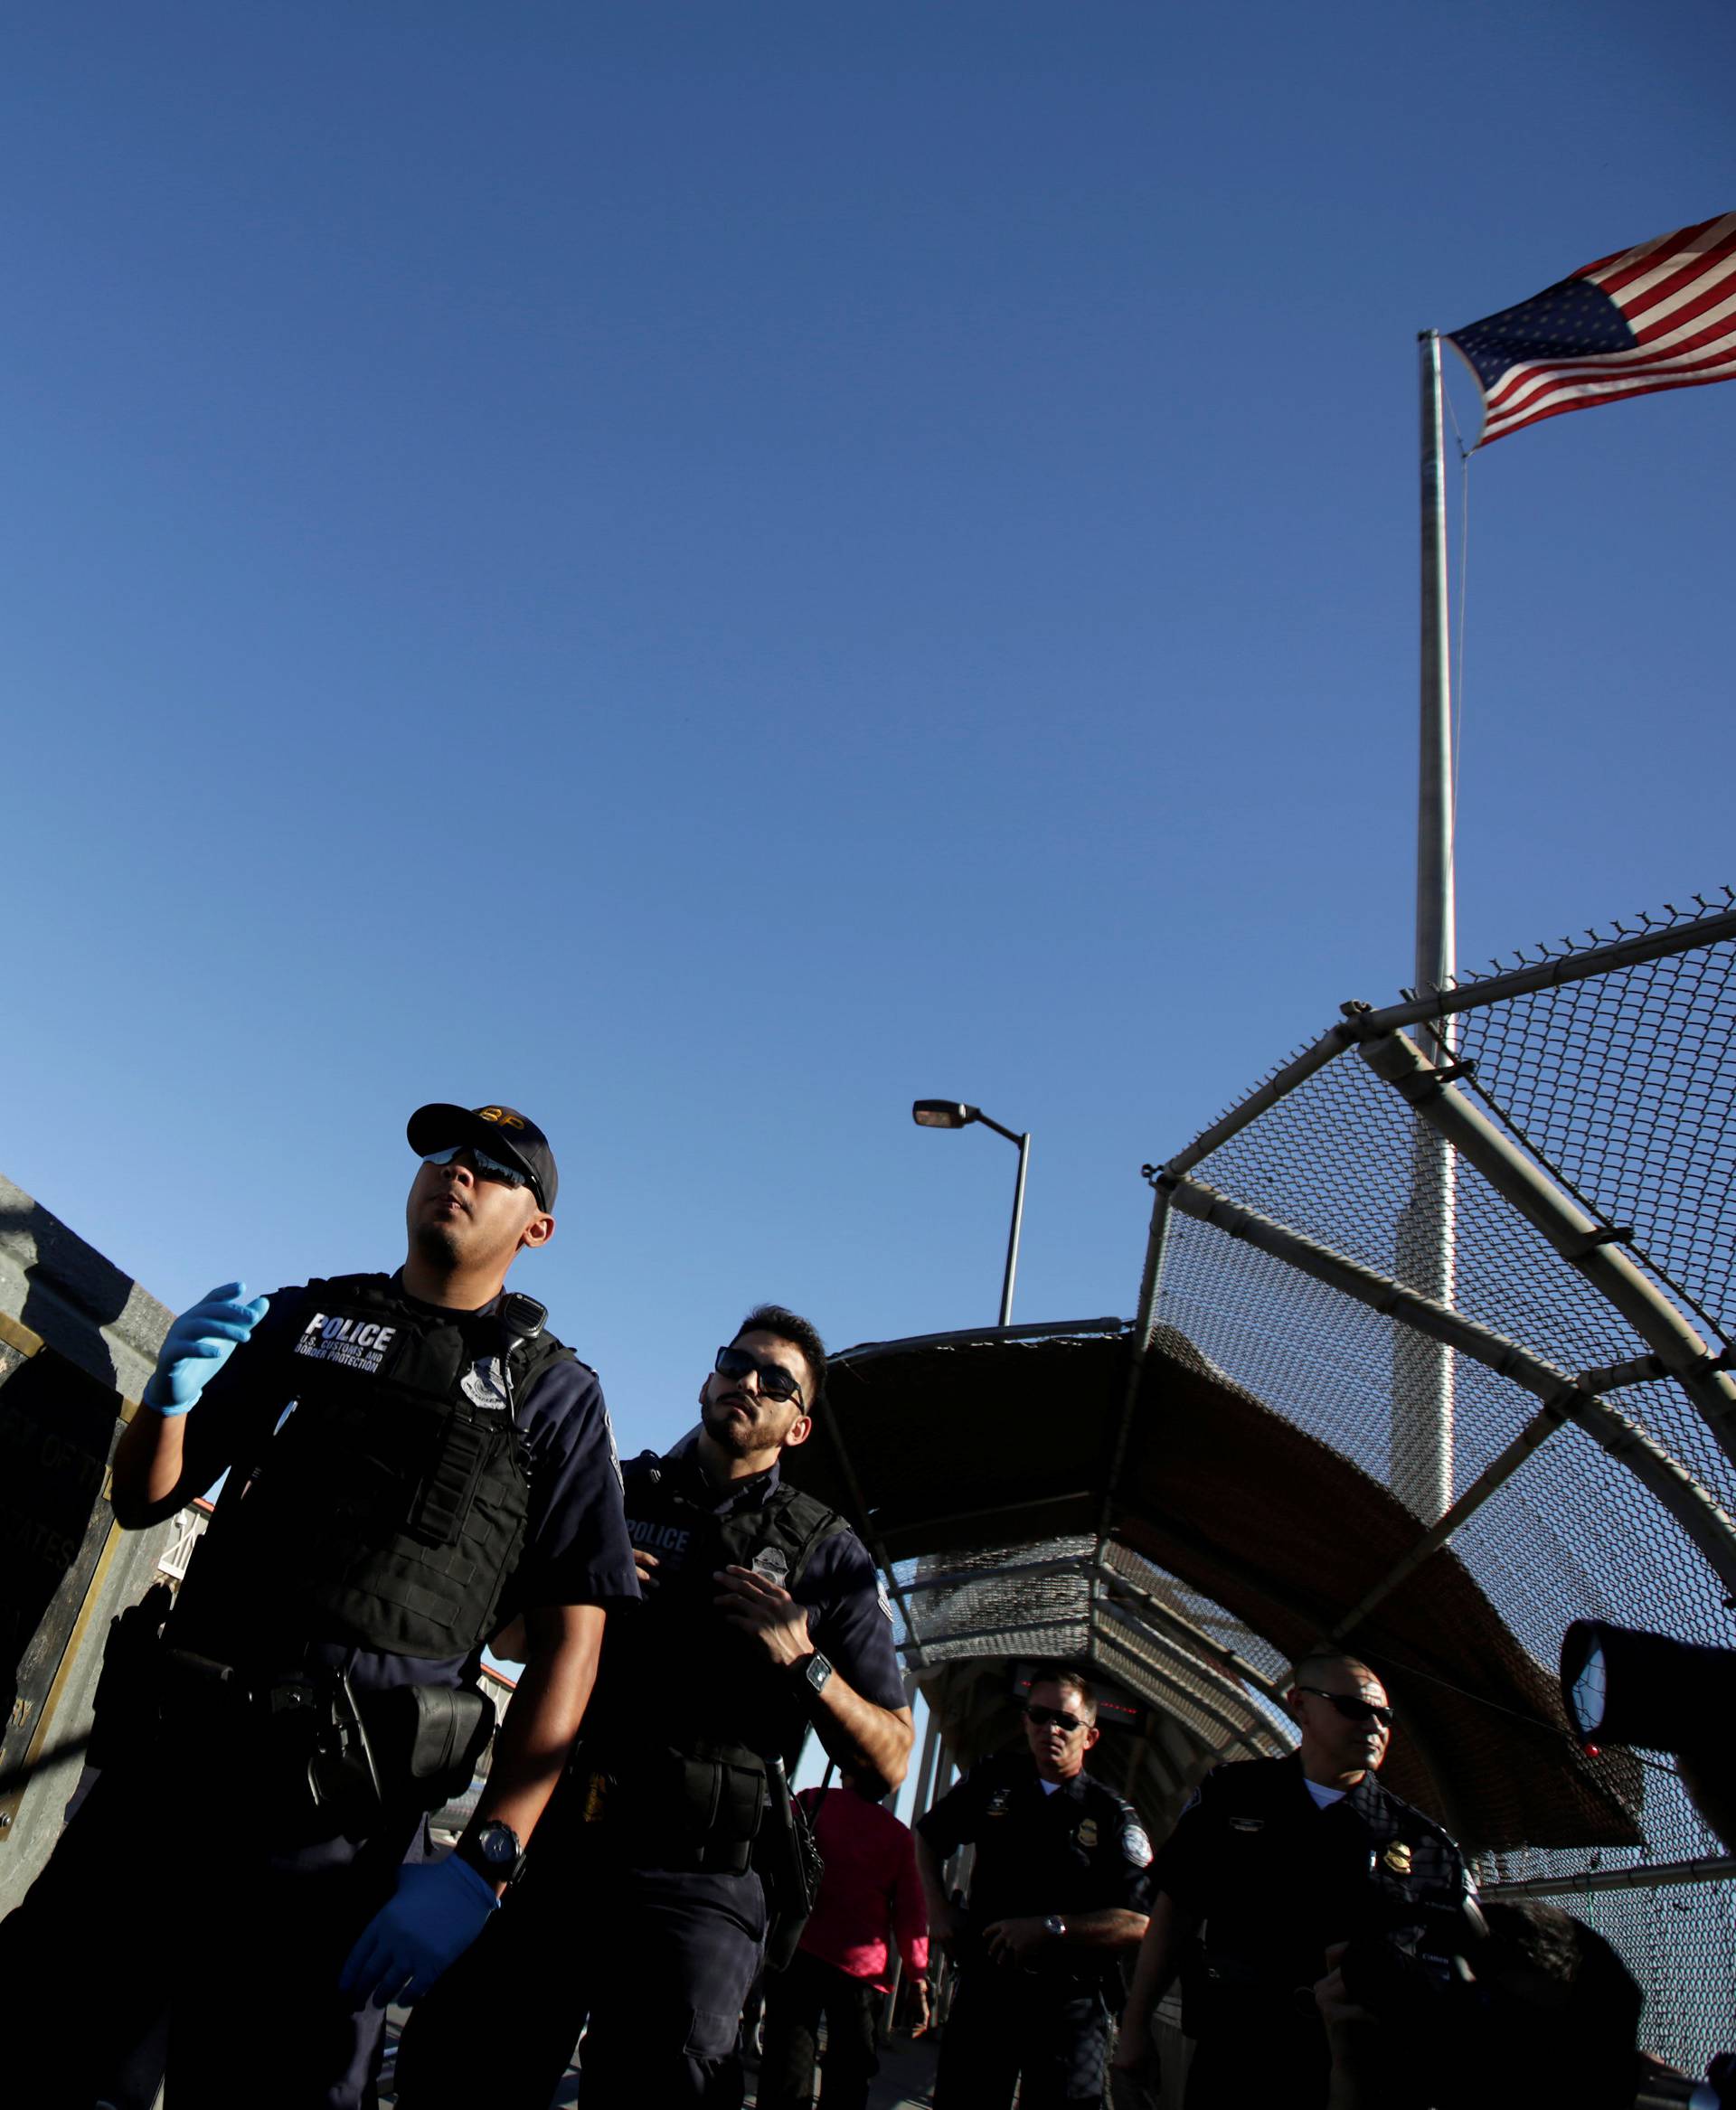 Officers of the U.S. Customs and Border Protection wait for migrants families from Mexico, fleeing from violence, to apply for asylum at Paso del Norte international border crossing bridge